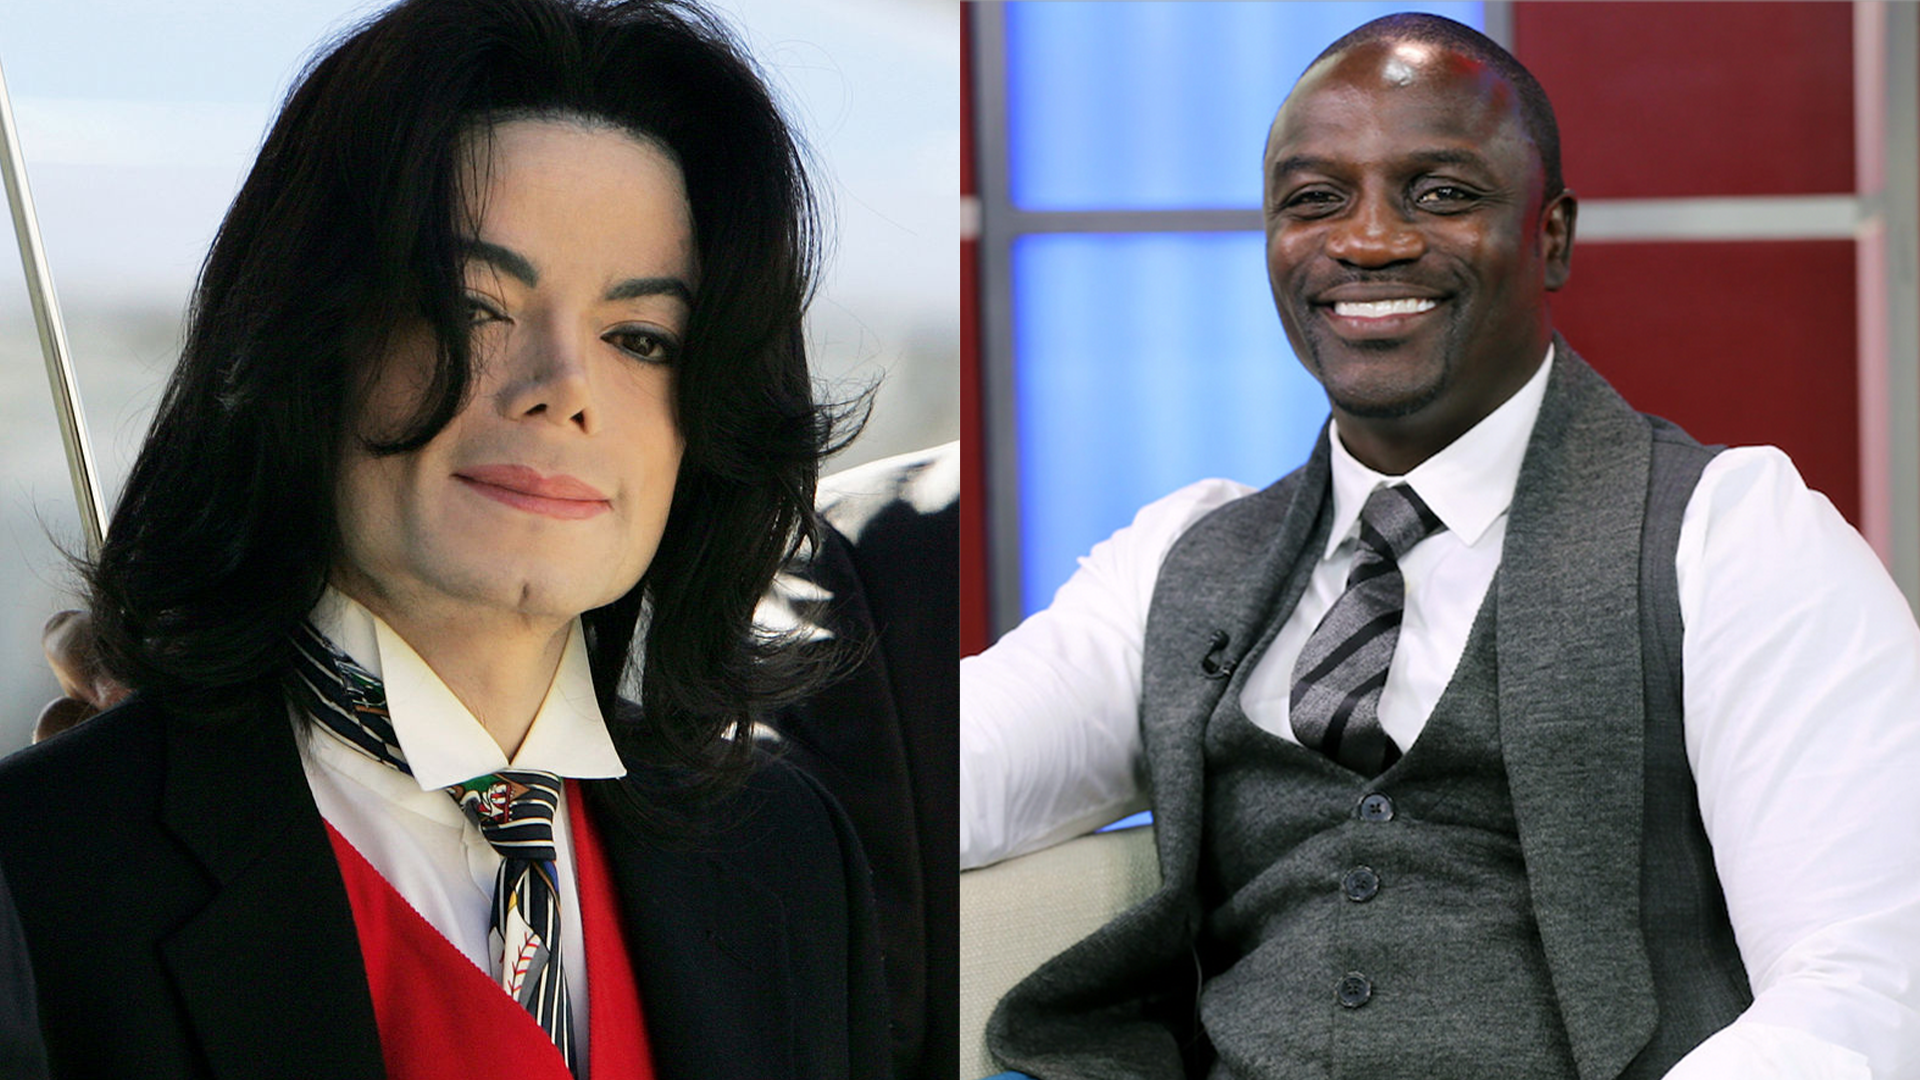 Akon Fulfills His And Michael Jackson's Plan To Open Schools In Africa By Naming Akon City's Educational District After The Pop Icon